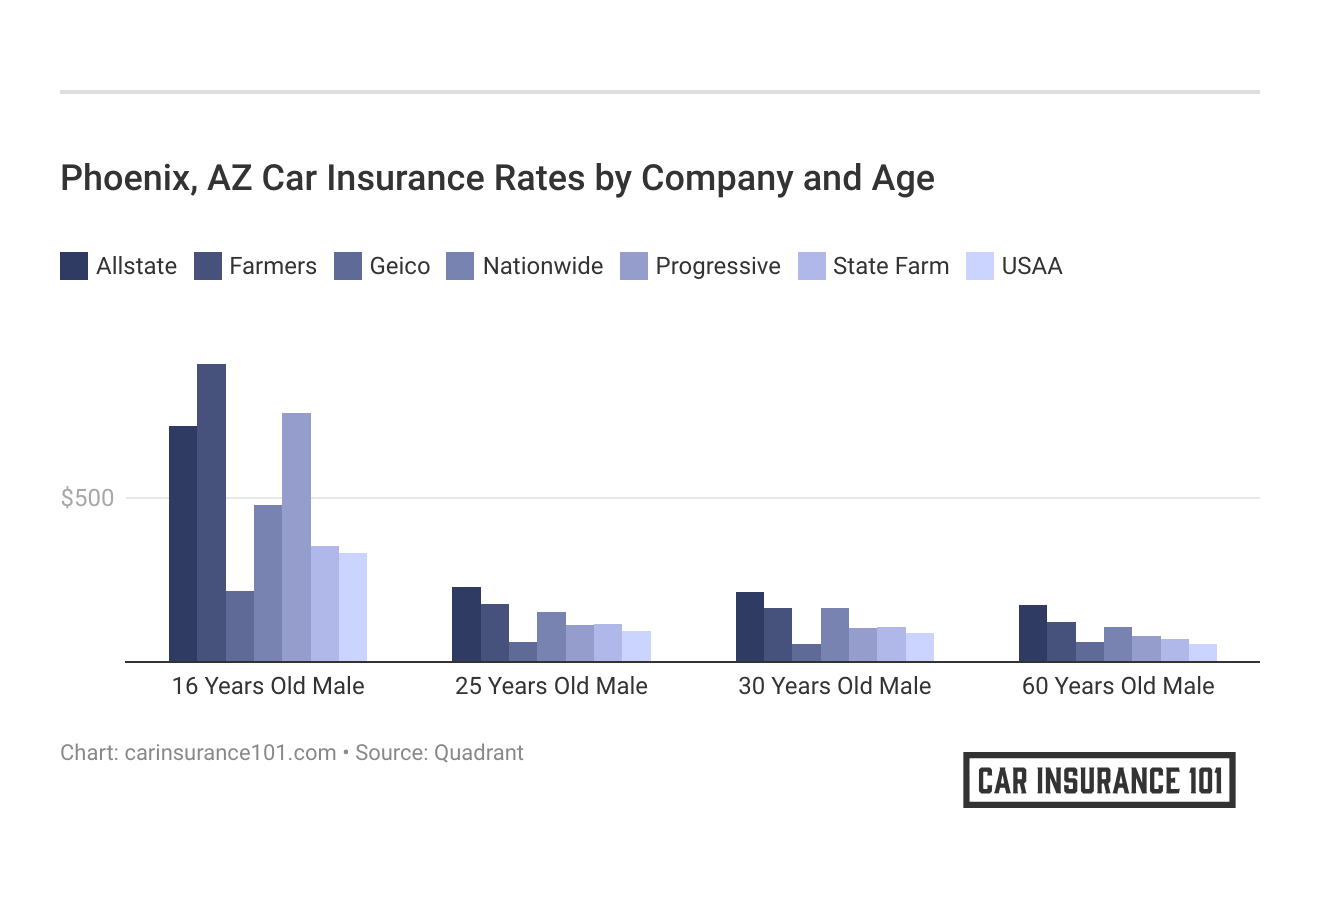 <h3>Phoenix, AZ Car Insurance Rates by Company and Age</h3>